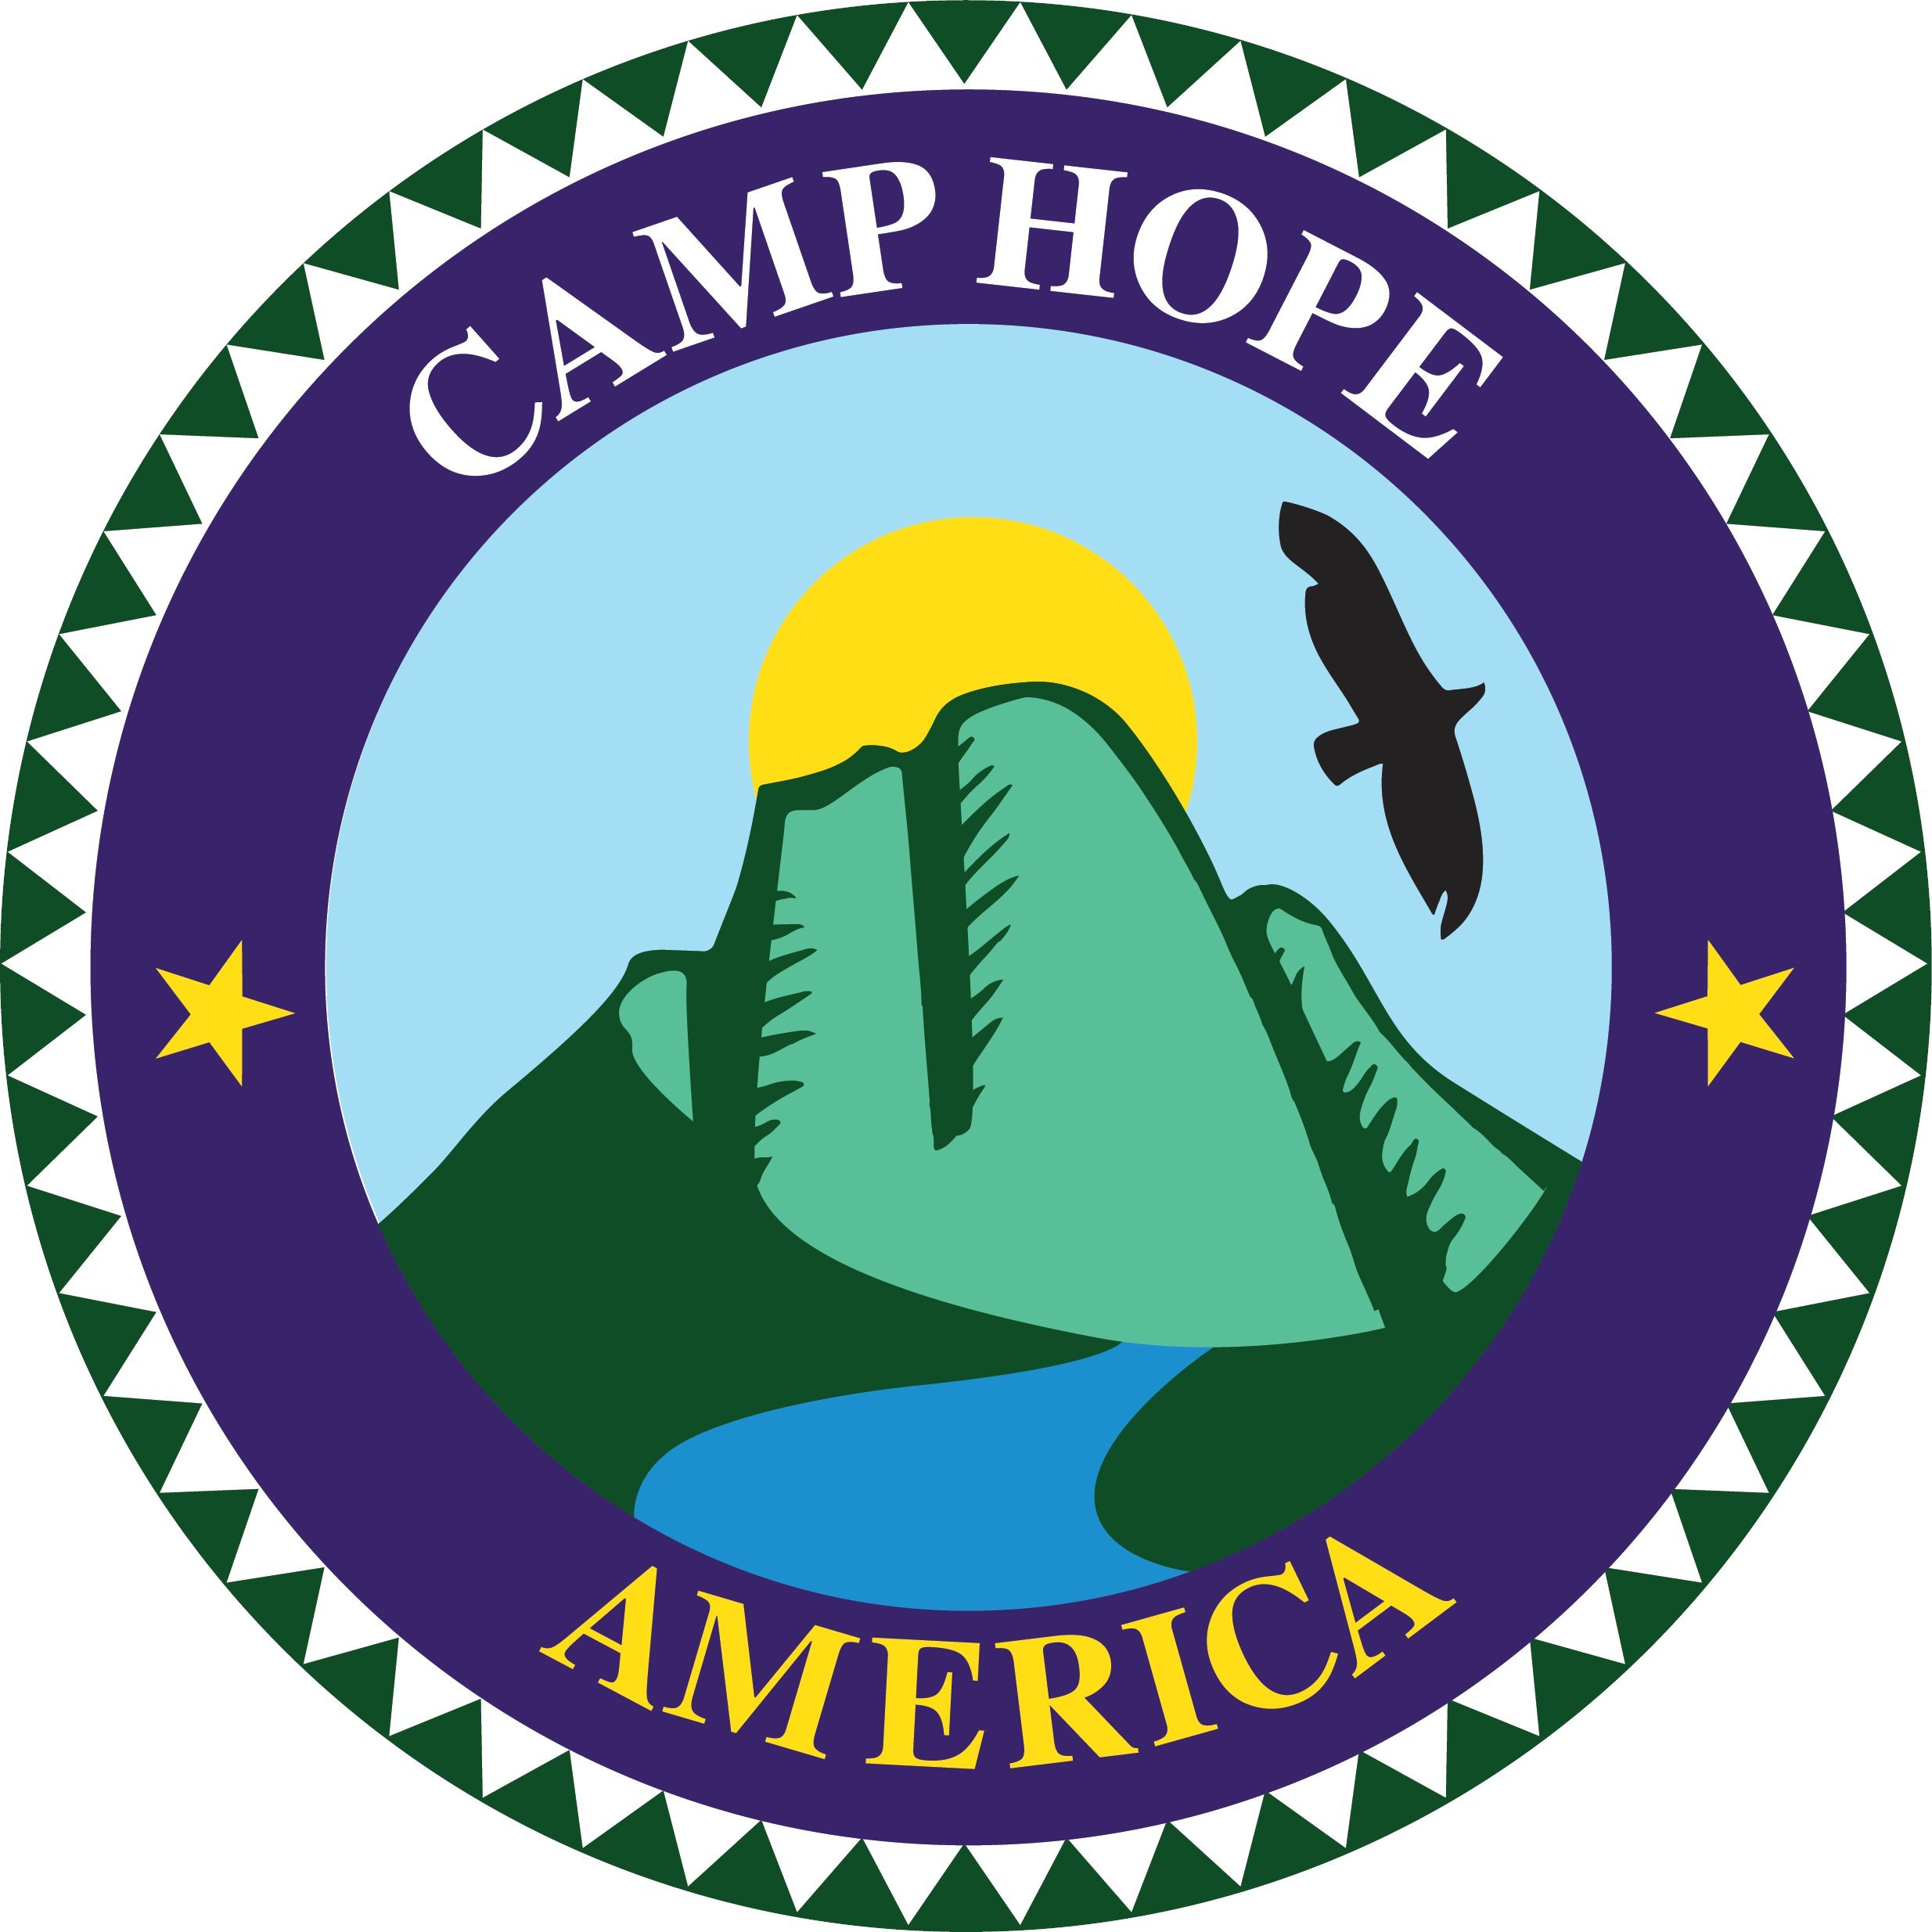 We are the leading year-round camping and mentoring program in the country for children and teens impacted by domestic violence.